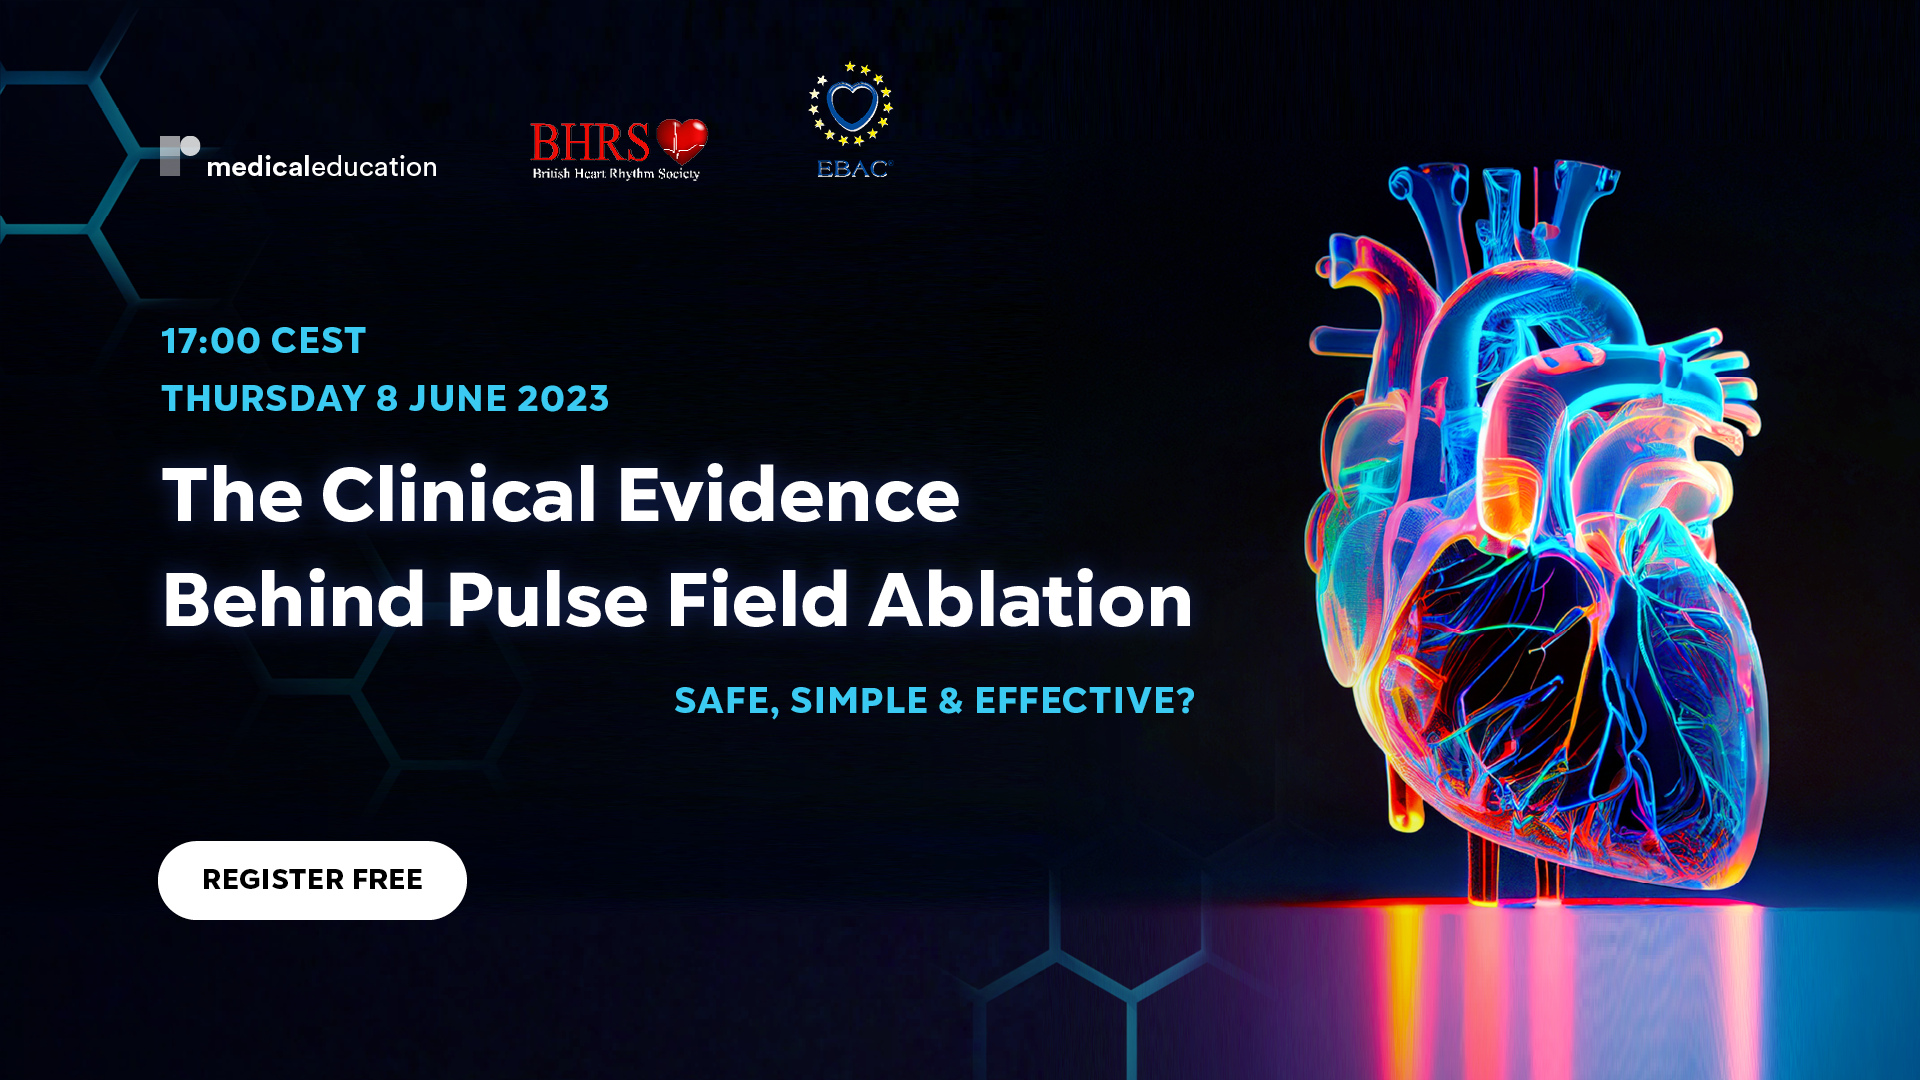 The Clinical Evidence Behind Pulse Field Ablation